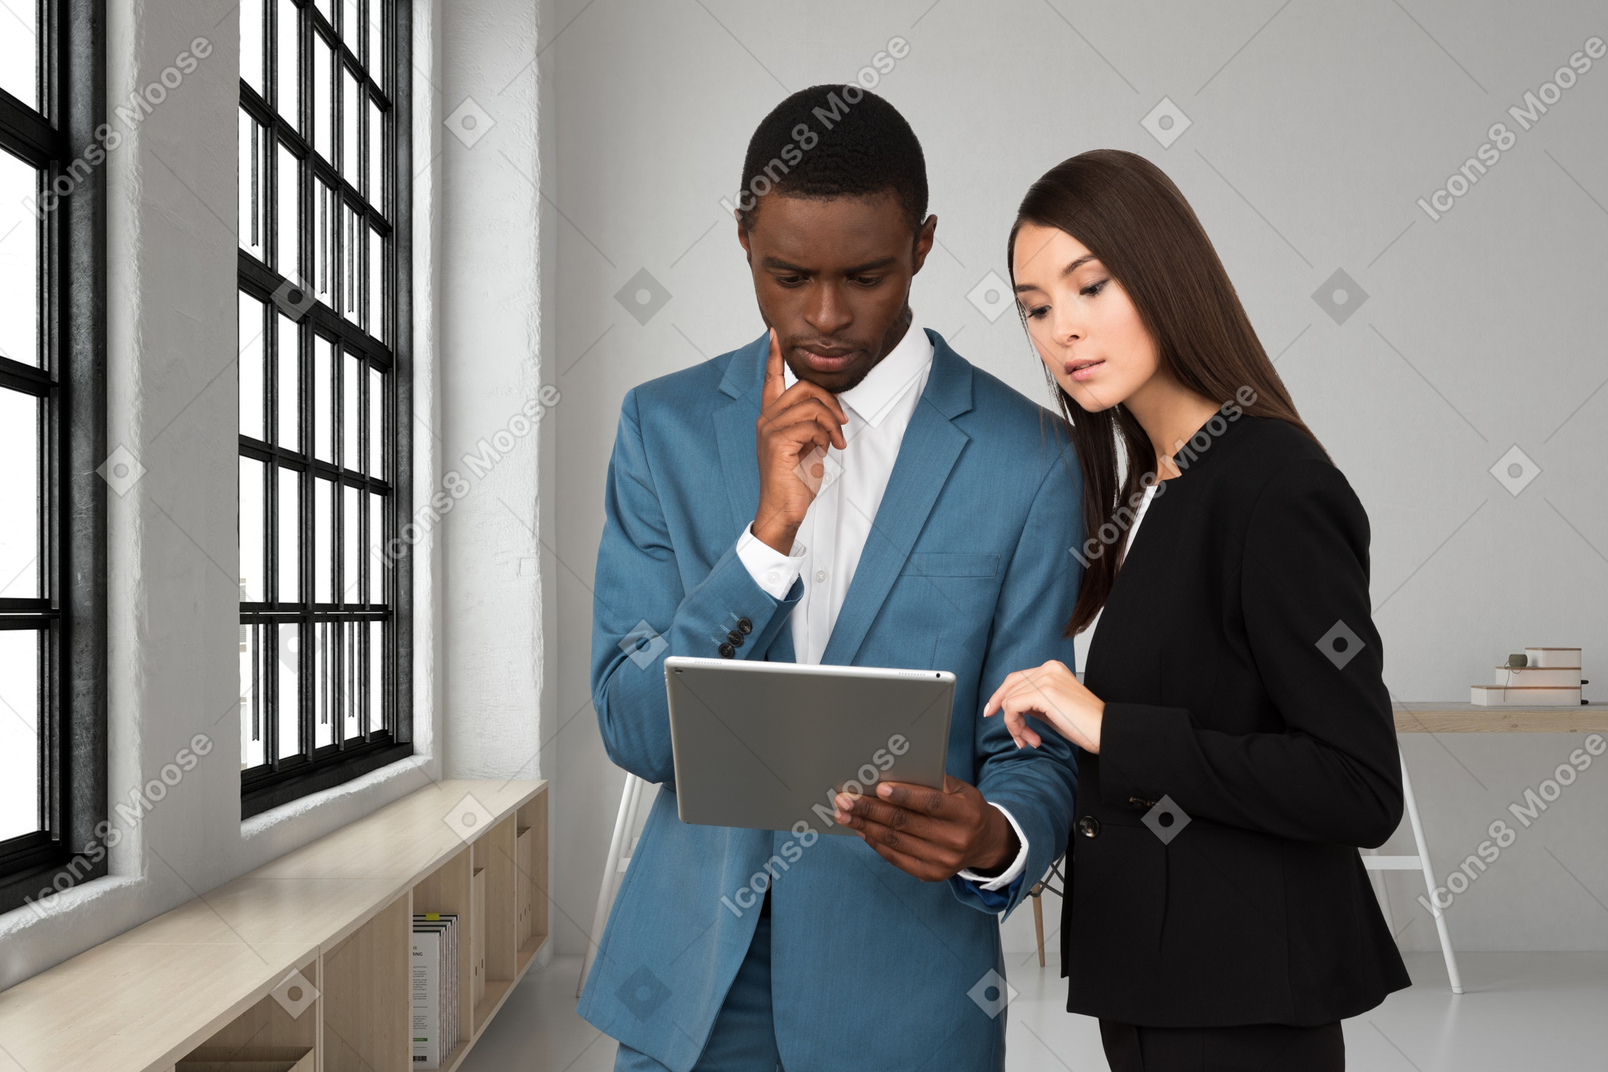 A man and a woman talking in an office